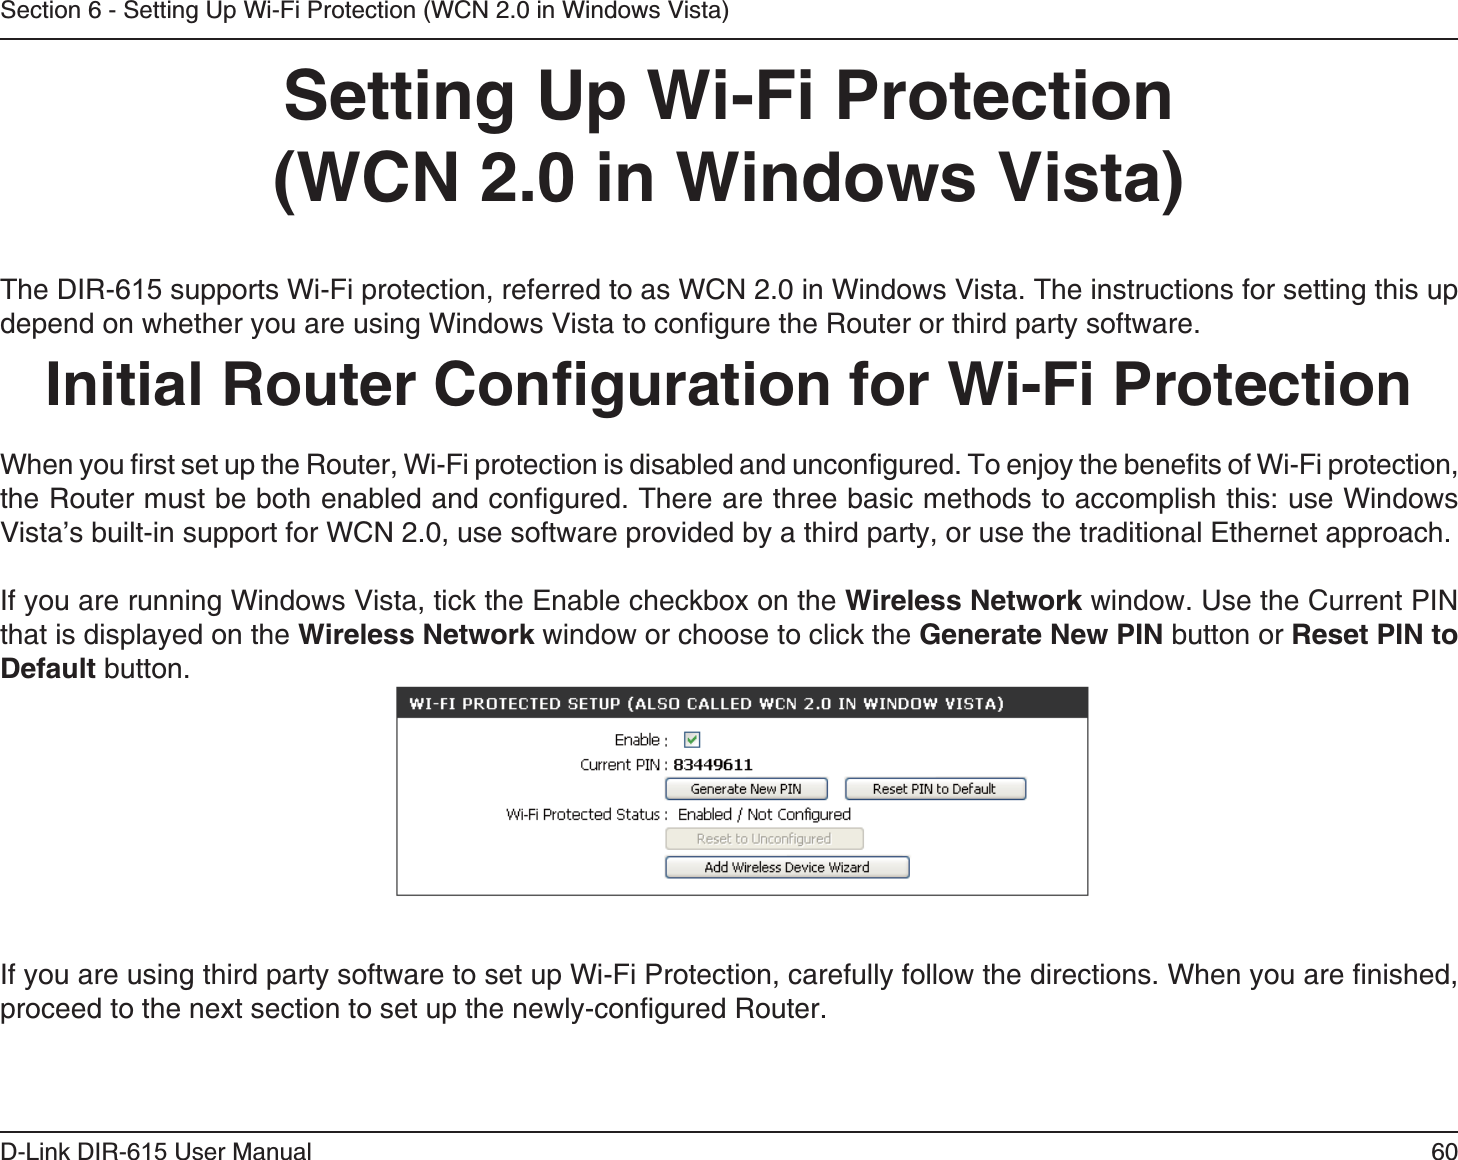 60D-Link DIR-6 User ManualSection 6 - Setting Up Wi-Fi Protection (WCN 2.0 in Windows Vista) The DIR-6 supports Wi-Fi protection, referred to as WCN 2.0 in Windows Vista. The instructions for setting this up depend on whether you are using Windows Vista to configure the Router or third party software.        When you first set up the Router, Wi-Fi protection is disabled and unconfigured. To enjoy the benefits of Wi-Fi protection, the Router must be both enabled and configured. There are three basic methods to accomplish this: use Windows Vista’s built-in support for WCN 2.0, use software provided by a third party, or use the traditional Ethernet approach. If you are running Windows Vista, tick the Enable checkbox on the  window. Use the Current PIN that is displayed on the  window or choose to click the  button or  button. If you are using third party software to set up Wi-Fi Protection, carefully follow the directions. When you are finished, proceed to the next section to set up the newly-configured Router. 